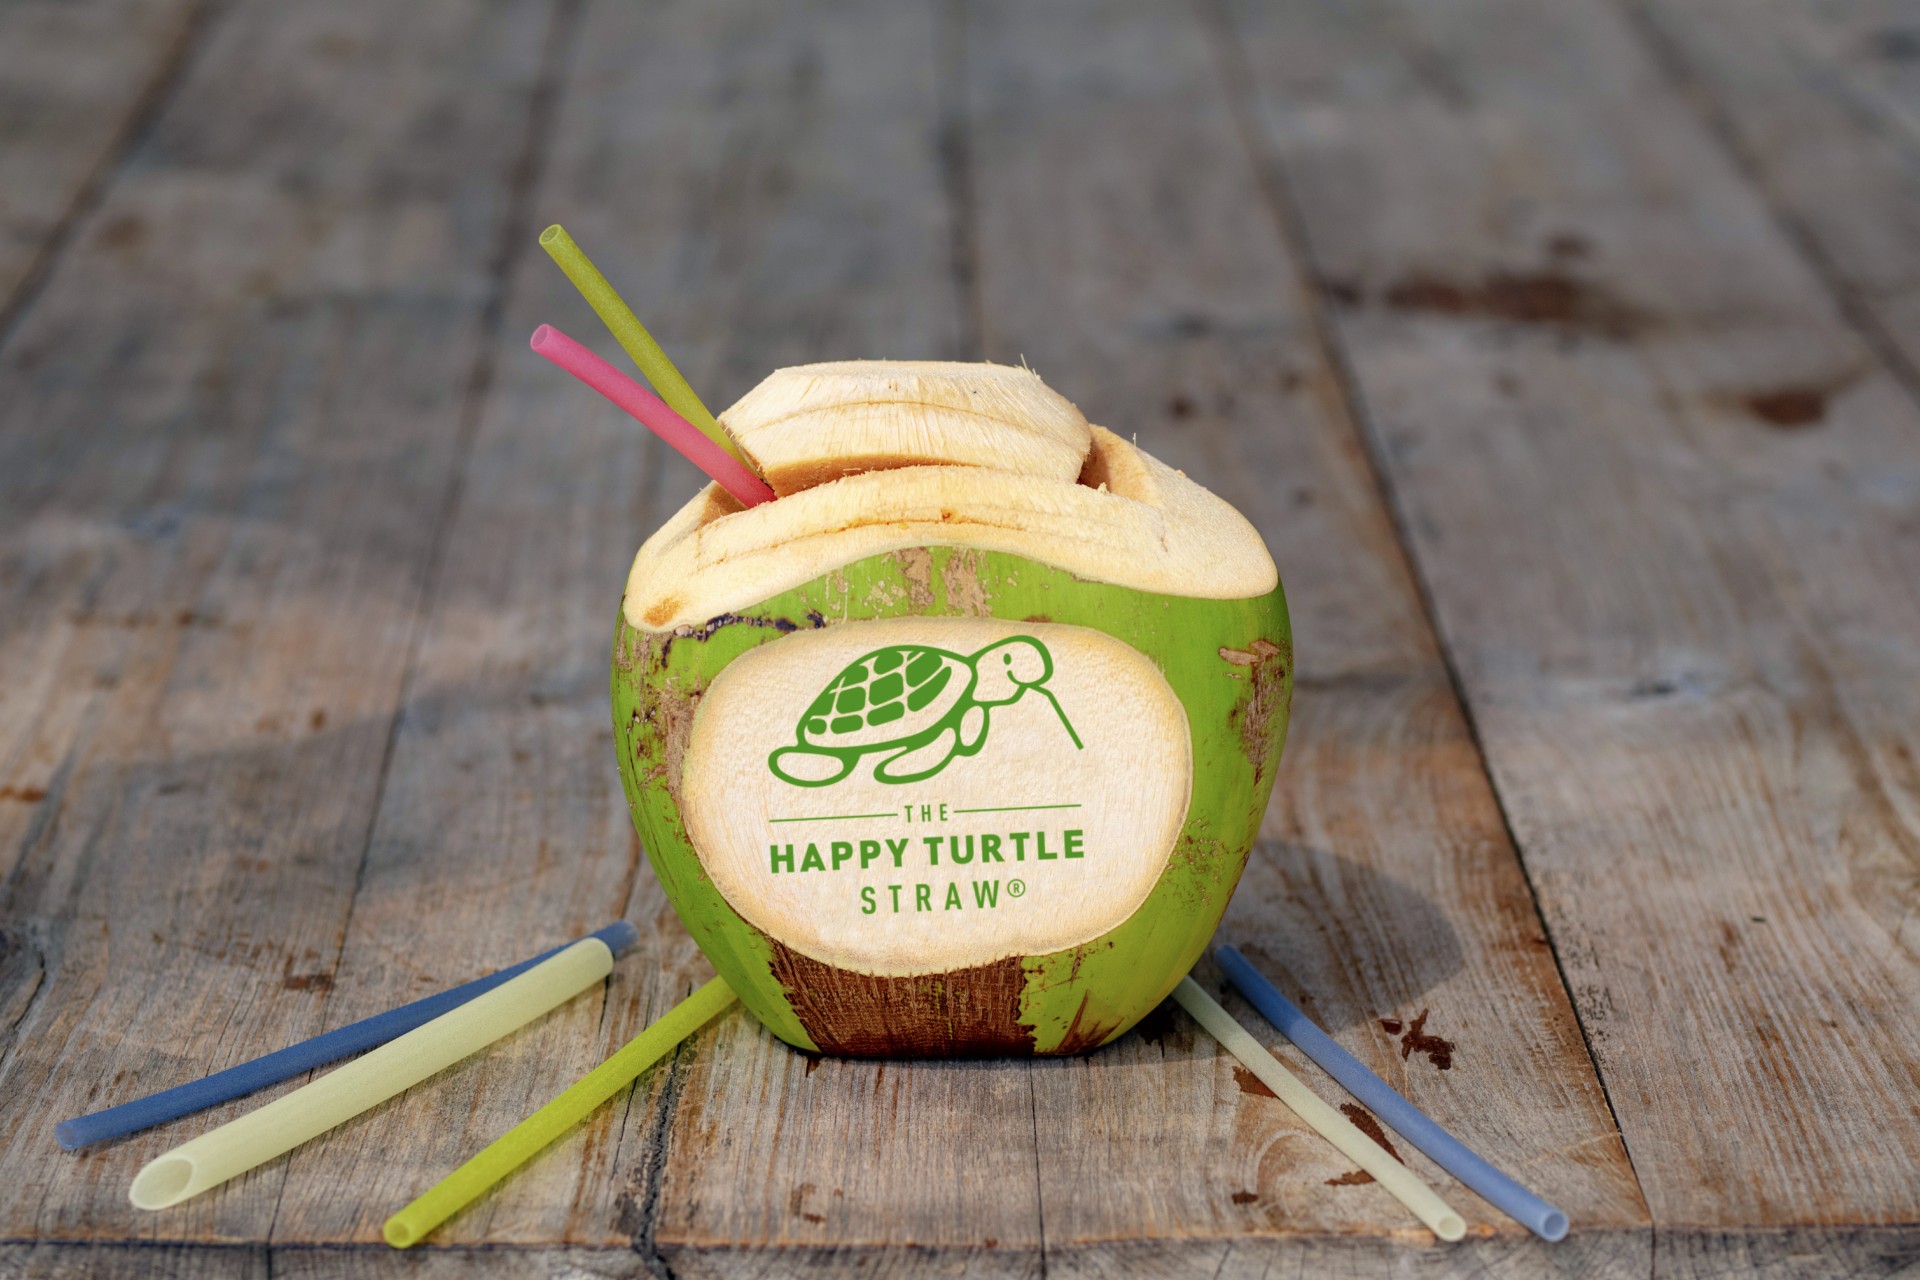 The Technology Behind The Happy Turtle Straw